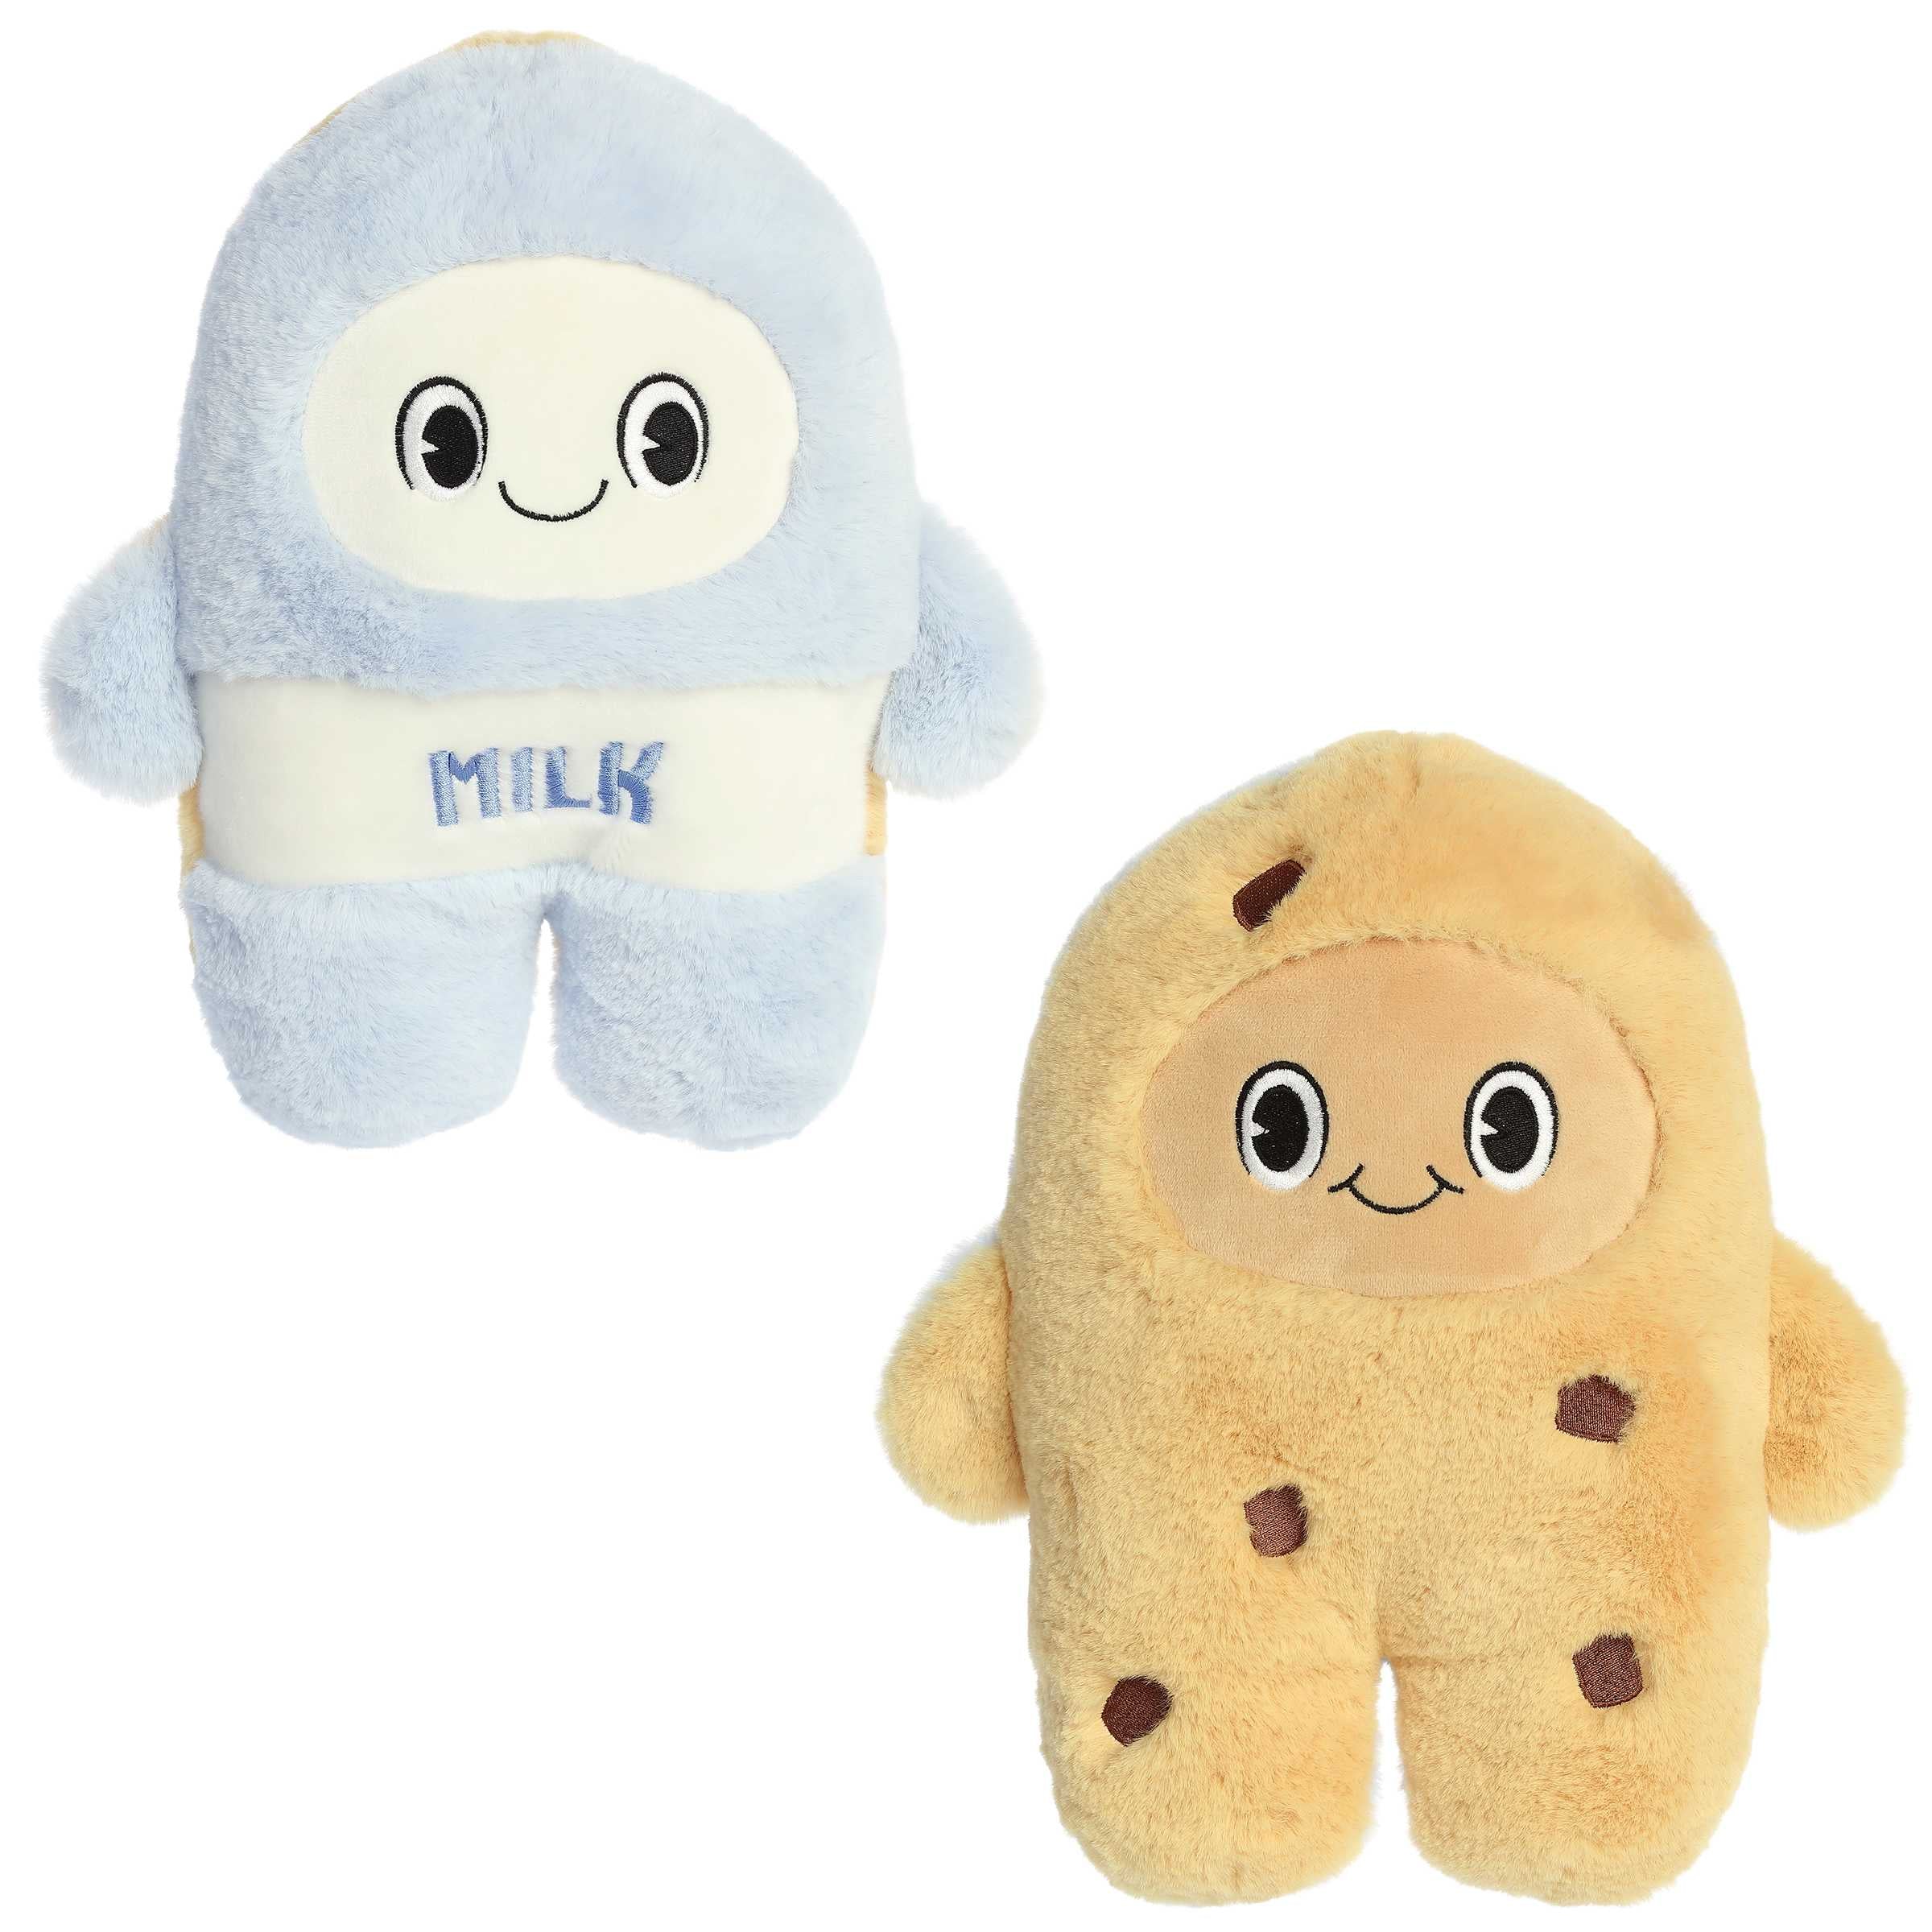 Transformable Milk & Cookies FlipOvers plush, shifting from milk carton to cookie, ideal for fun and gifts.